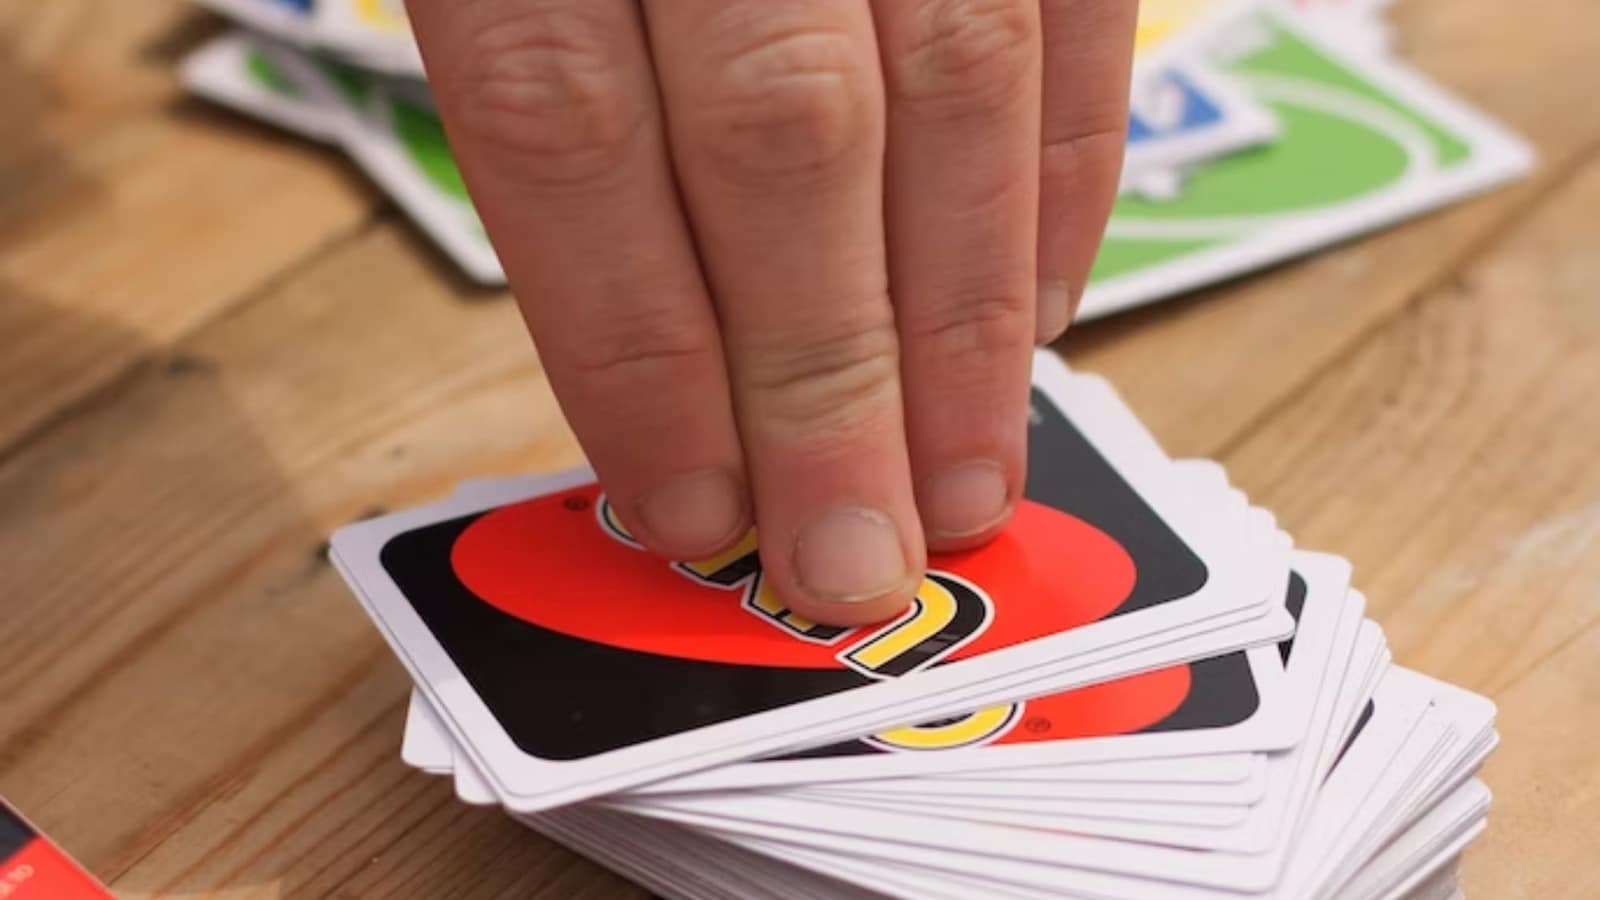 Mattel is hiring ‘Chief UNO Player’ to promote a new game. Are you up for the job?